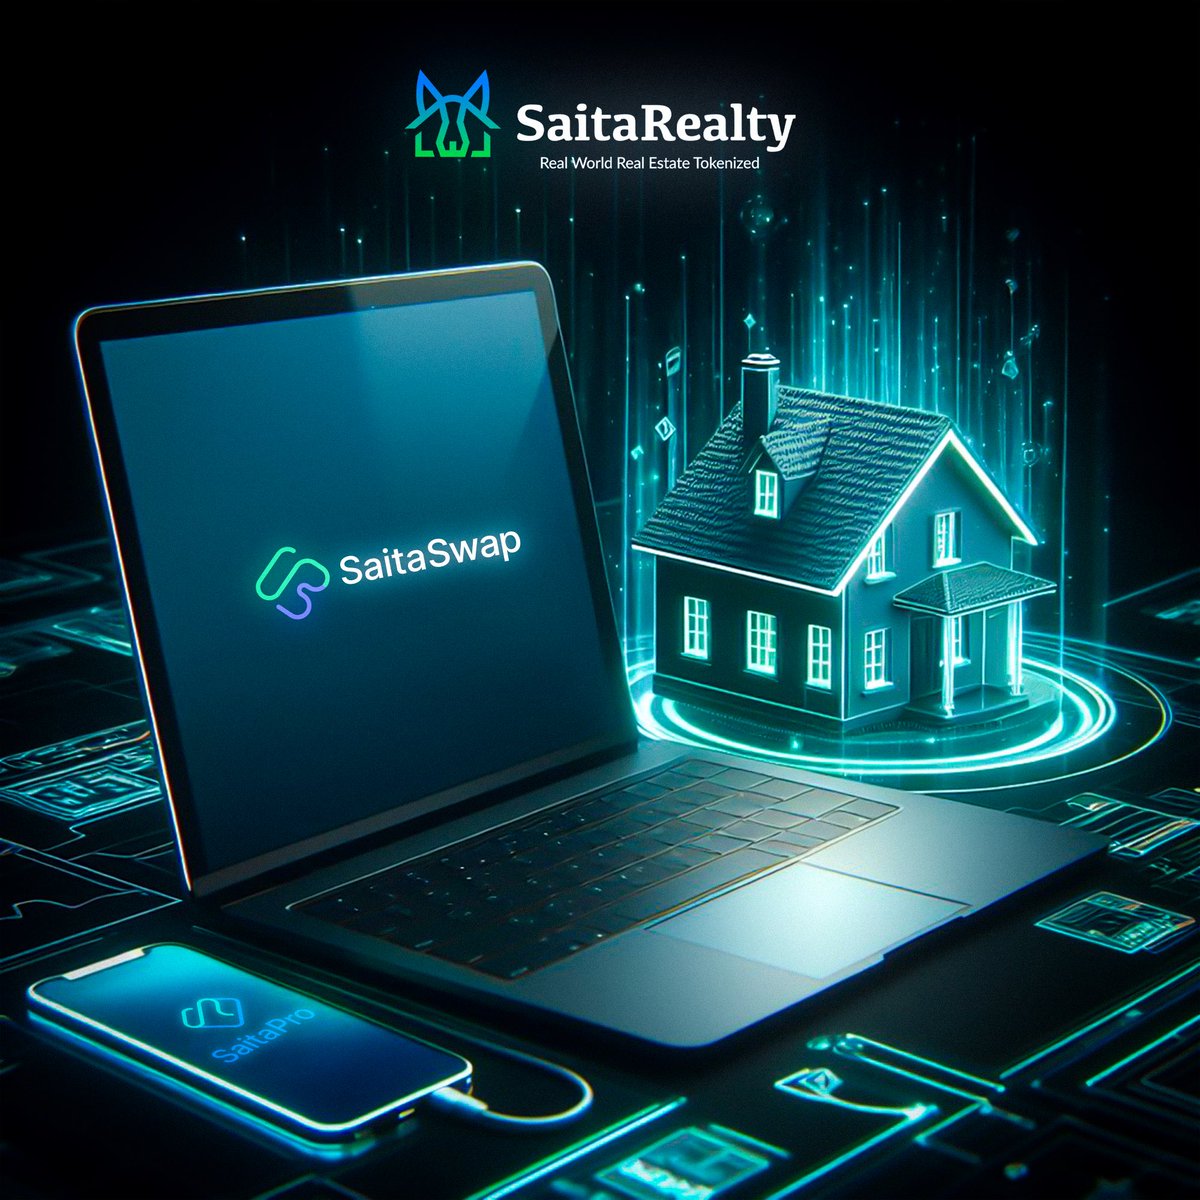 Happy Friday #SaitaRealtors ☀️ Are you ready to take your 𝗦𝗮𝗶𝘁𝗮𝗥𝗲𝗮𝗹𝘁𝘆 token experience to the next level? It’s an in house thing 😎🏡 Our DEX platform, dex.saita.pro, and mobile app, 𝗦𝗮𝗶𝘁𝗮𝗣𝗿𝗼, now support 𝗦𝗮𝗶𝘁𝗮𝗥𝗲𝗮𝗹𝘁𝘆 tokens for both ETH…